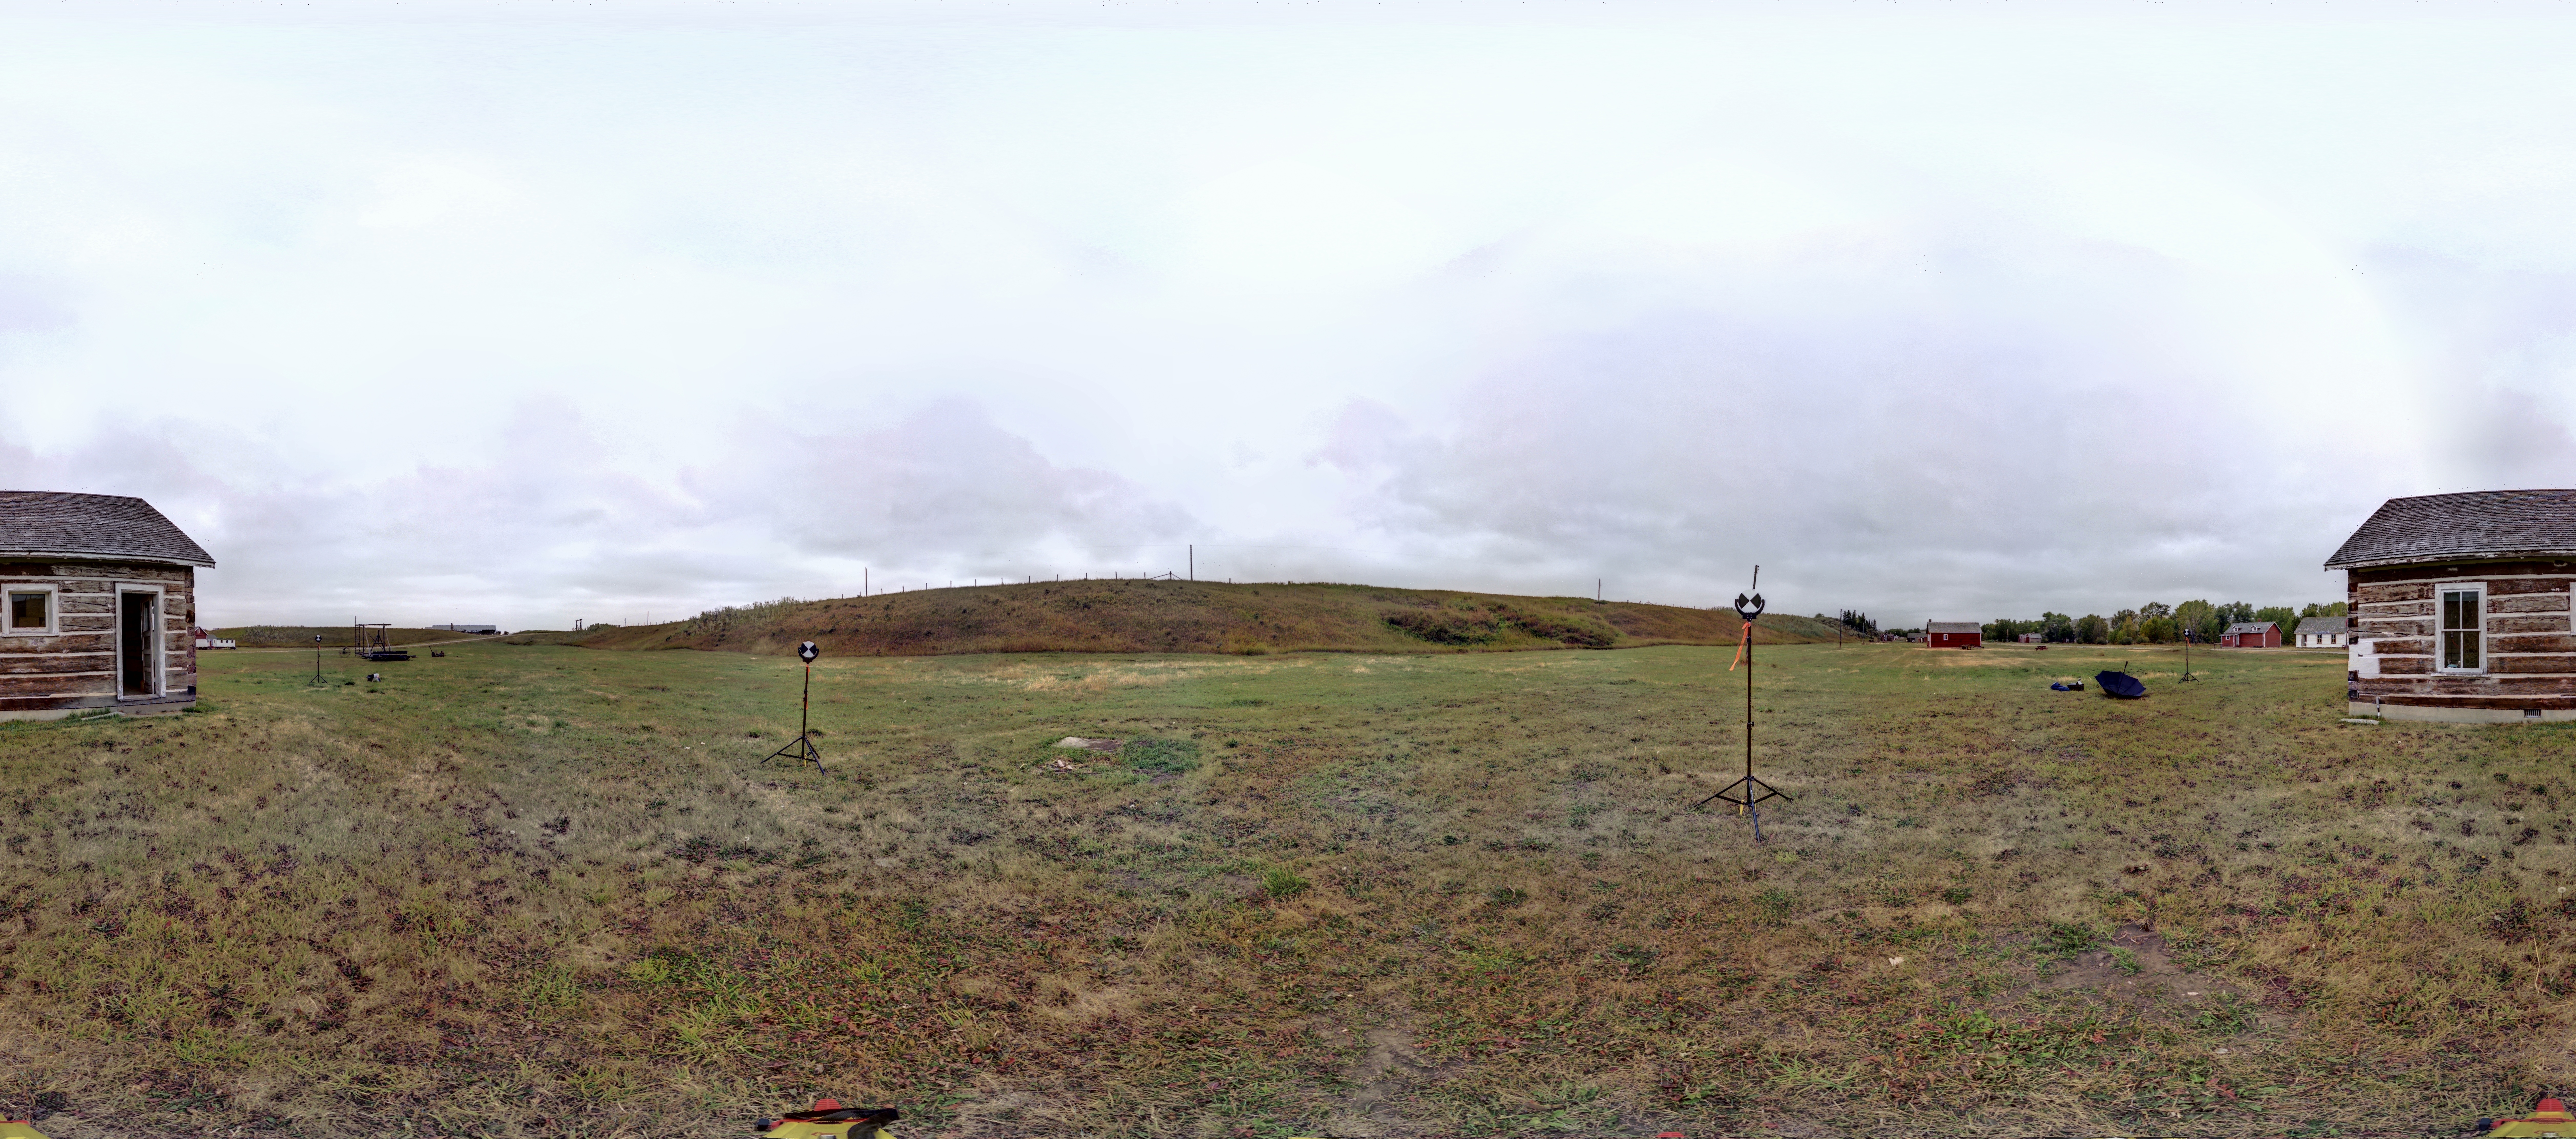 Panoramic image of scanning location 7 of the exterior of the Foreman's House at Bar U Ranch